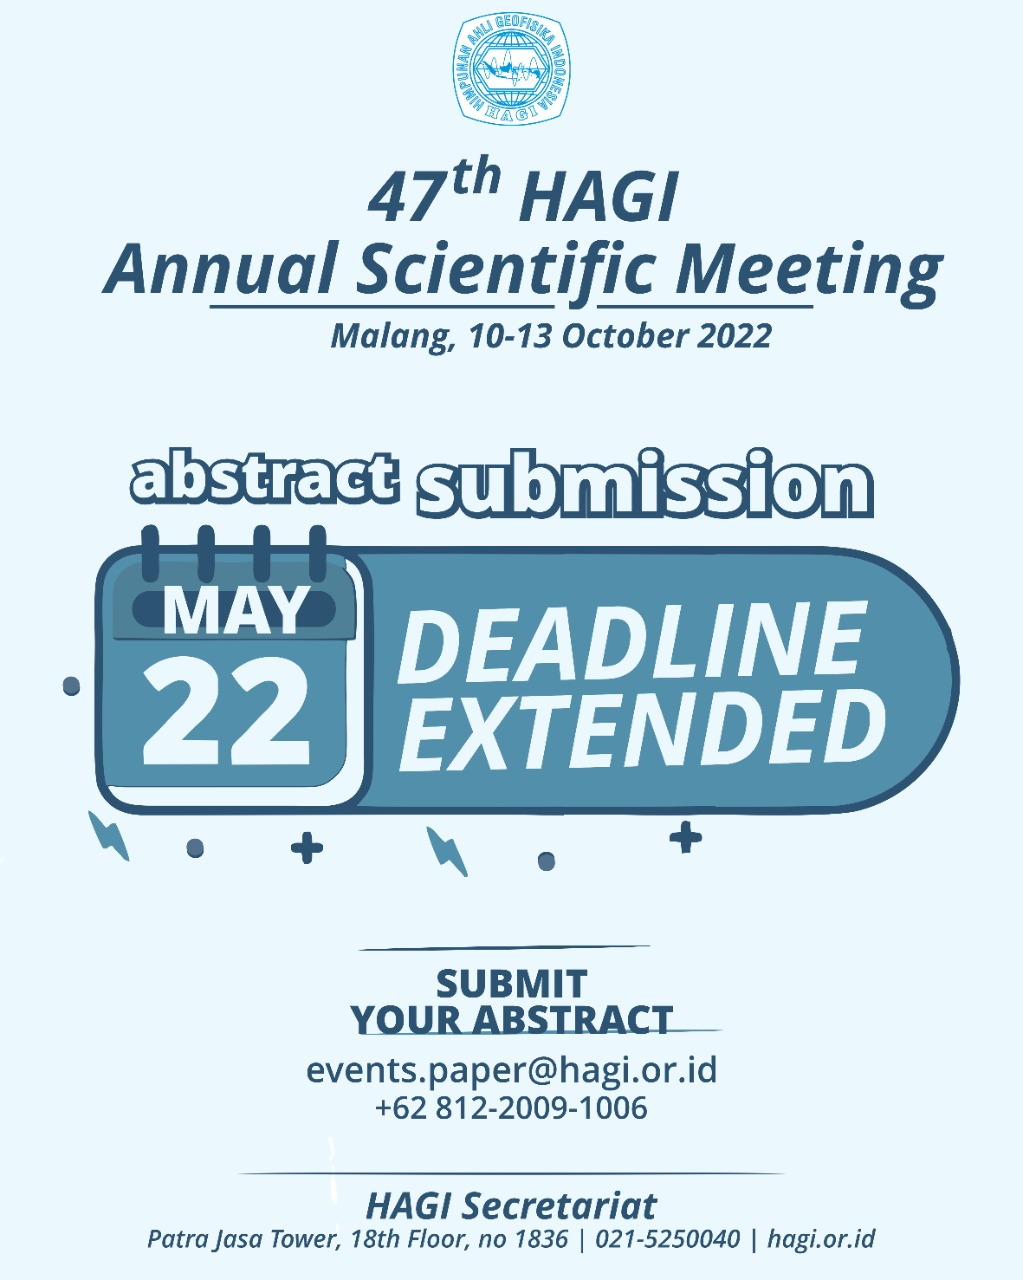 Abstract Submission Deadline has been extended to 22nd May 2022! HAGI